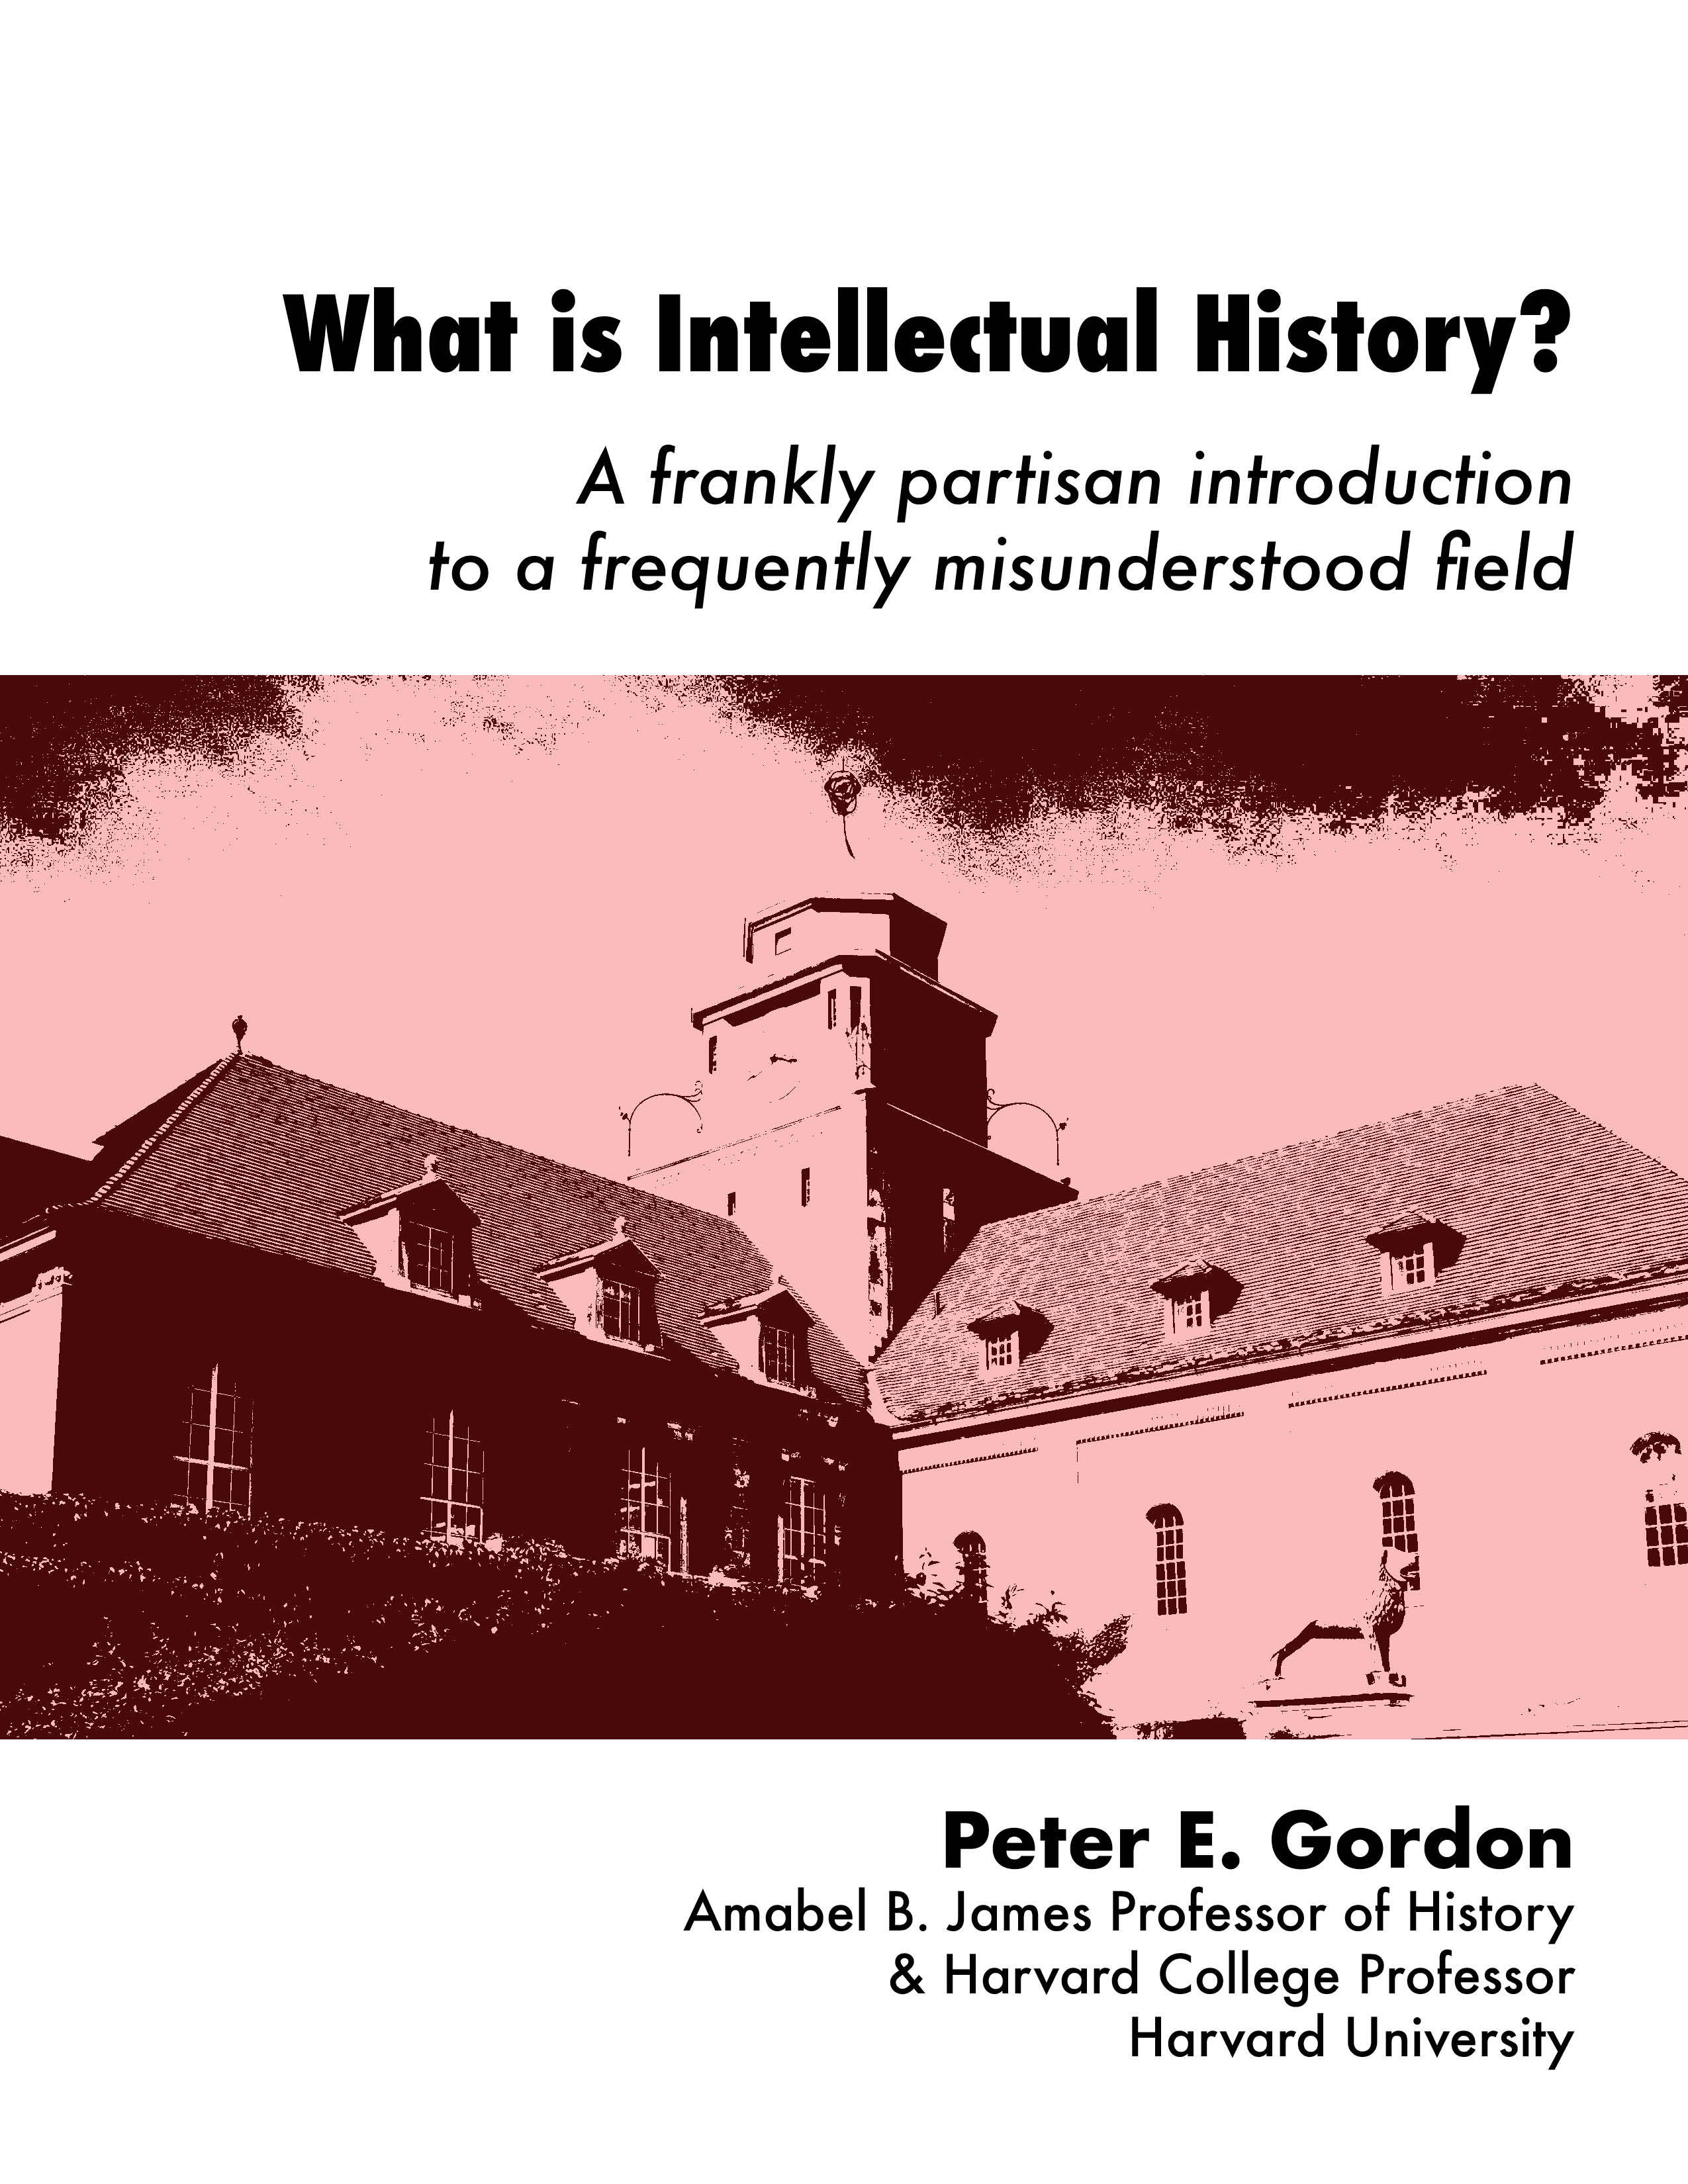 What is Intellectual History?